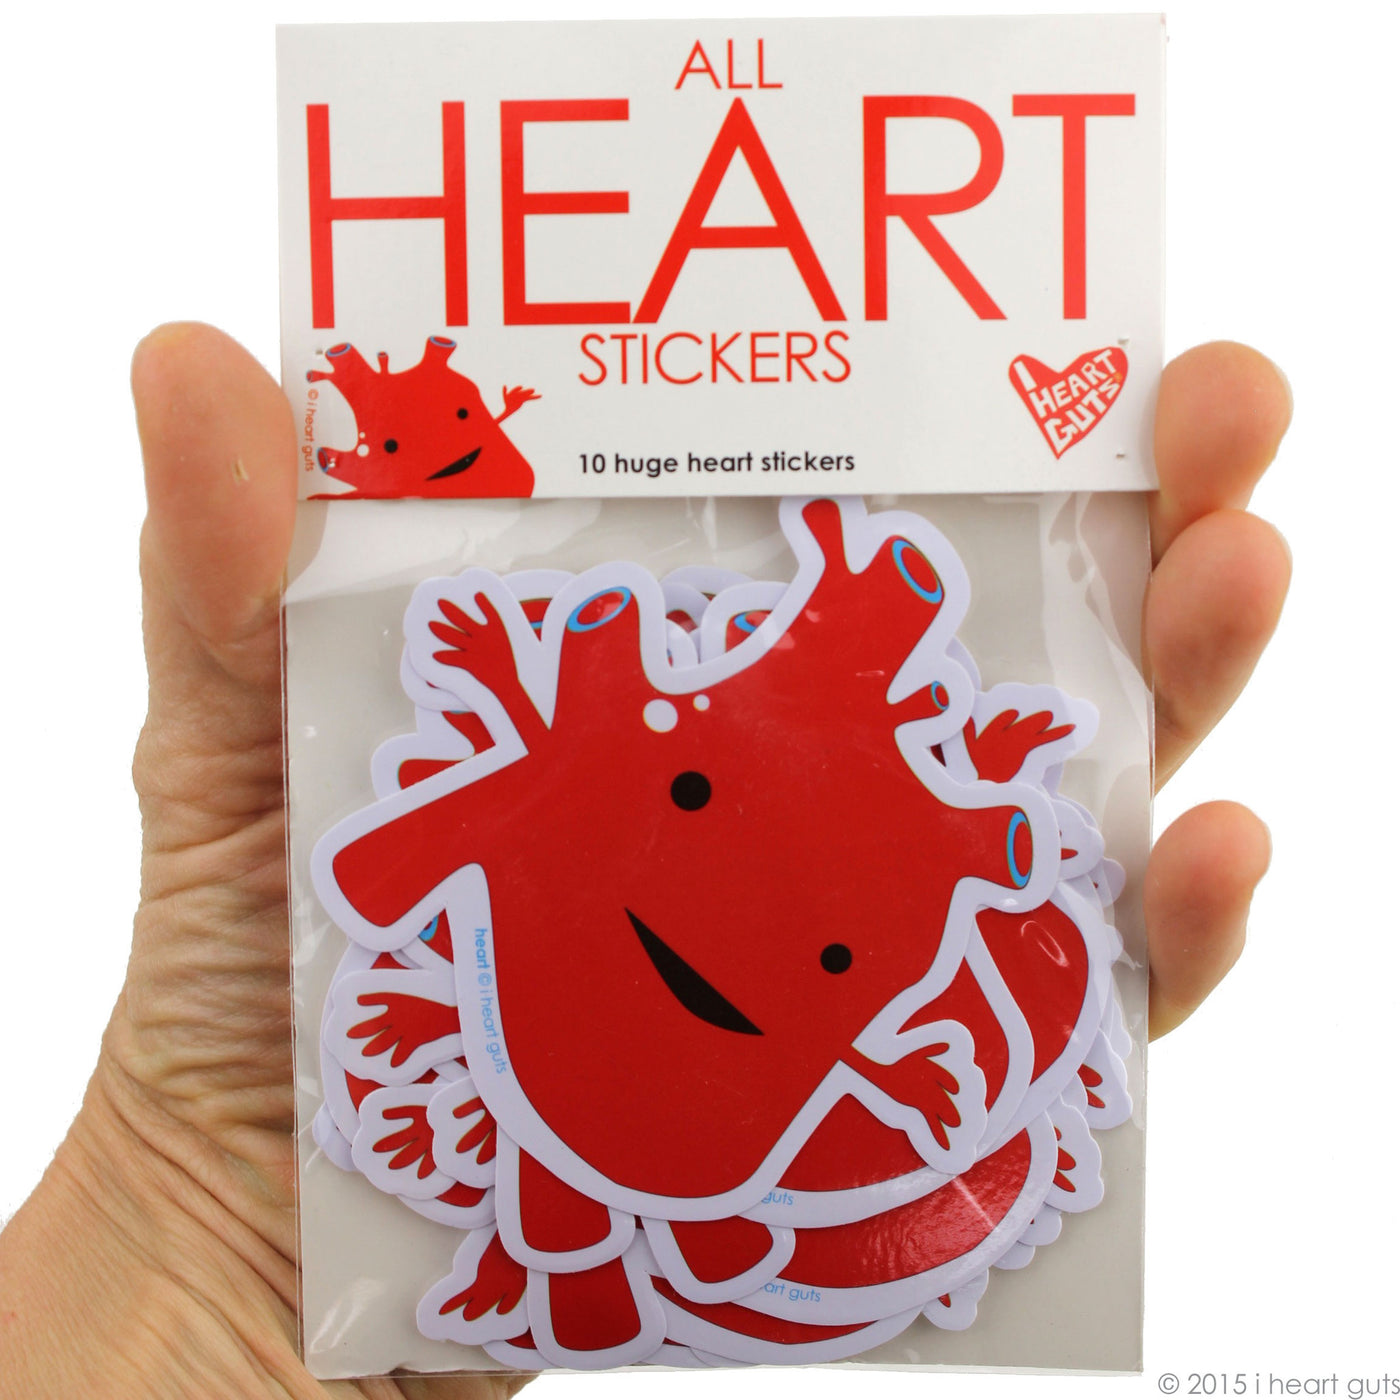 Heart Stickers | Cute Heart Stickers - Anatomical Human Heart Stickers